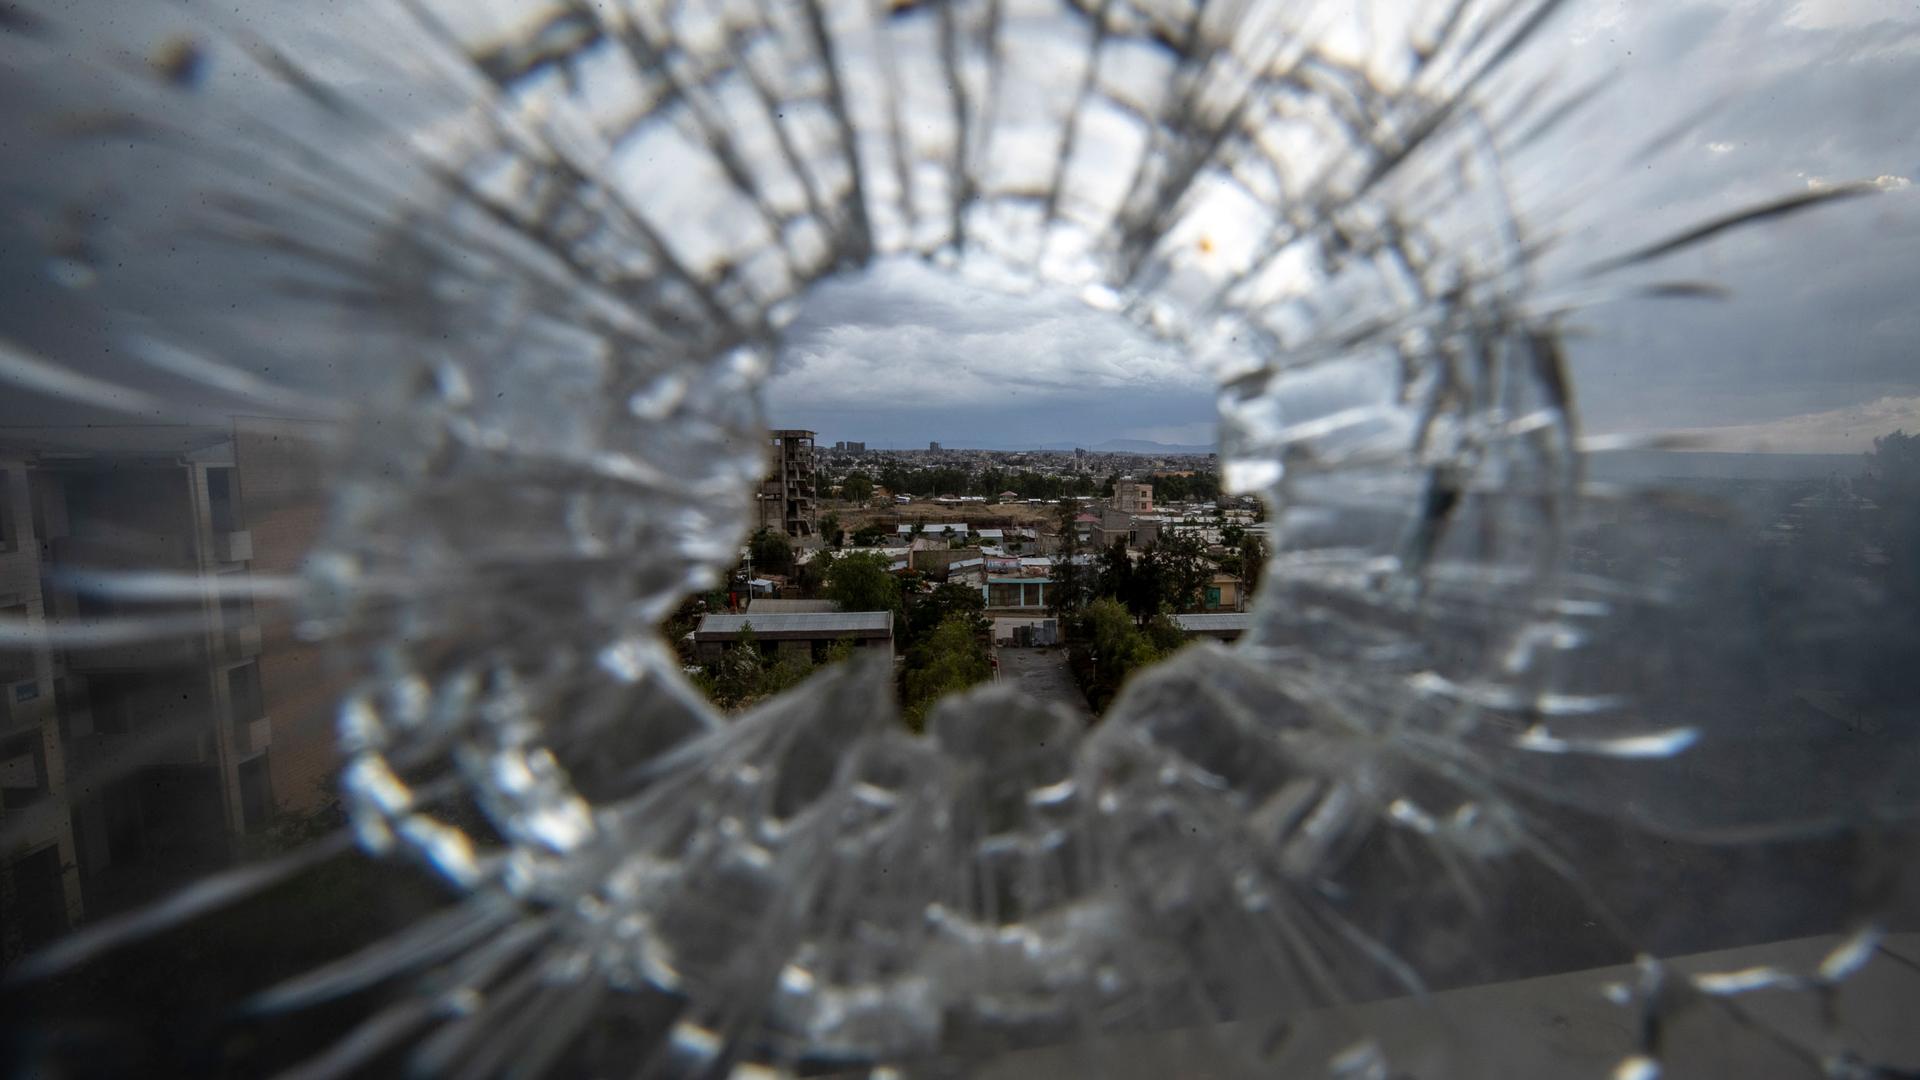 A circular hole is shown in a in a glass windown with cracks radiating from the center and through the hole buildings can be seen.